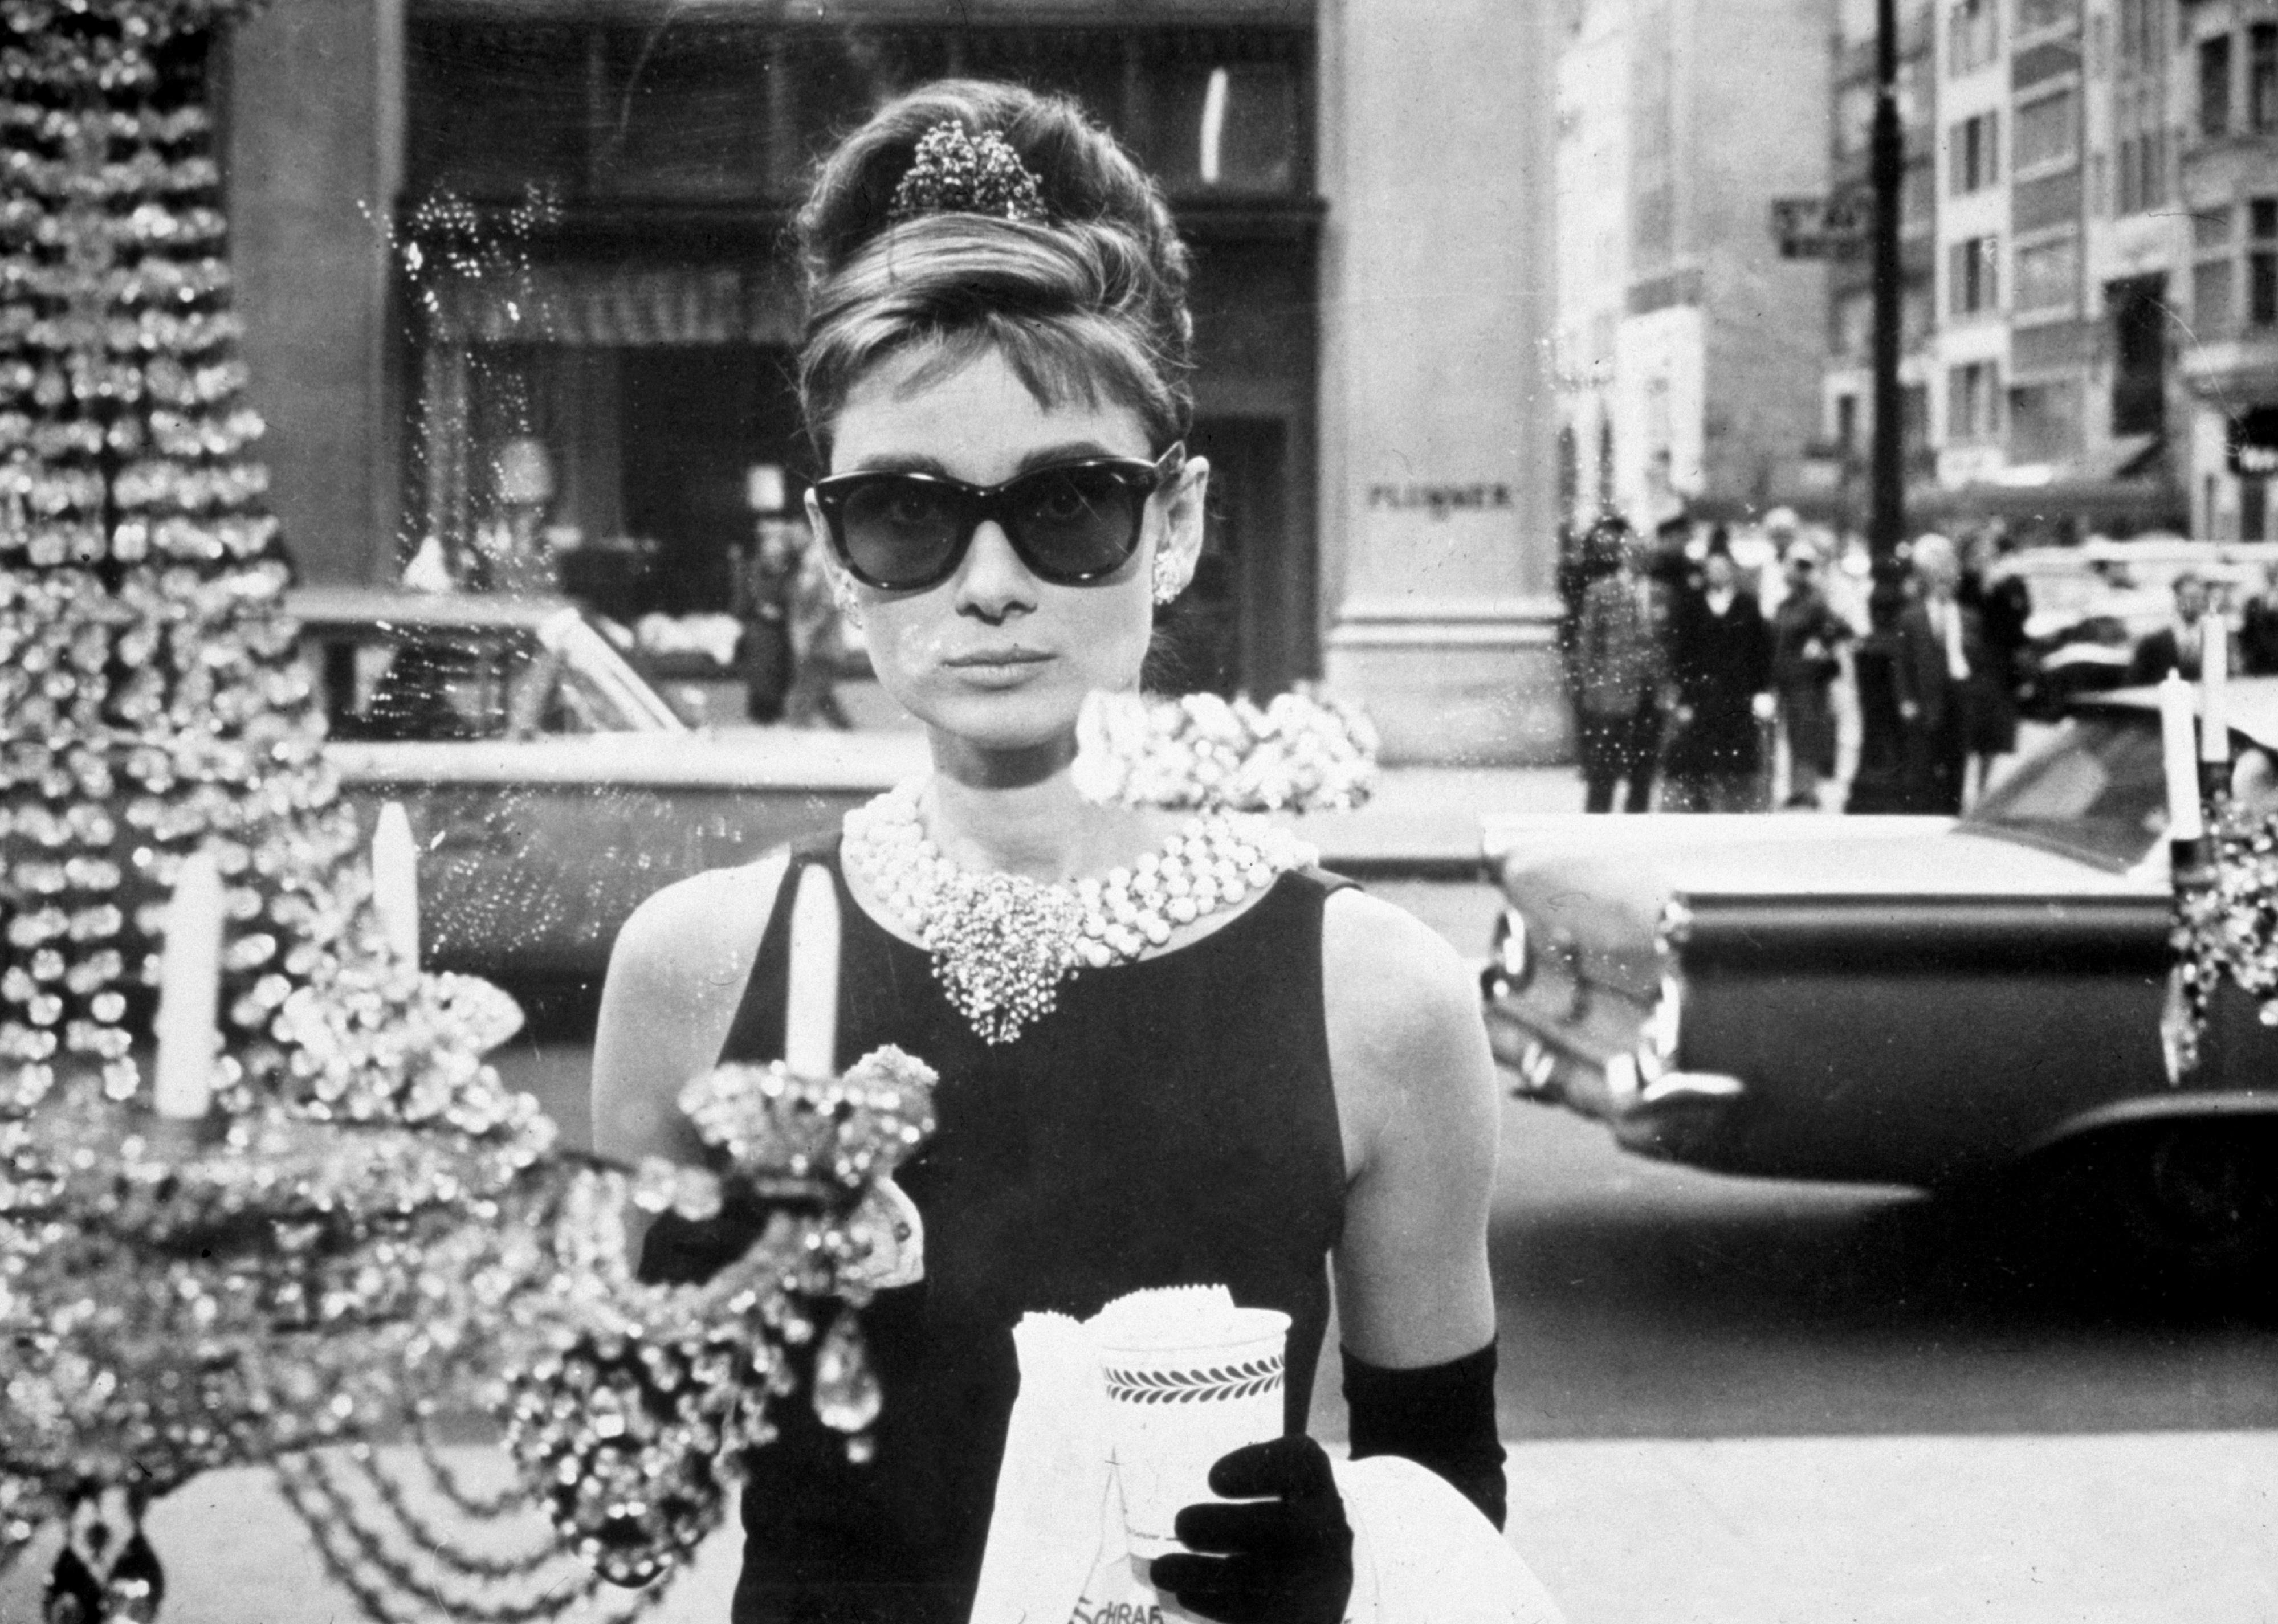 Audrey Hepburn as Holly Golightly in a still from the film, Breakfast at Tiffany's.